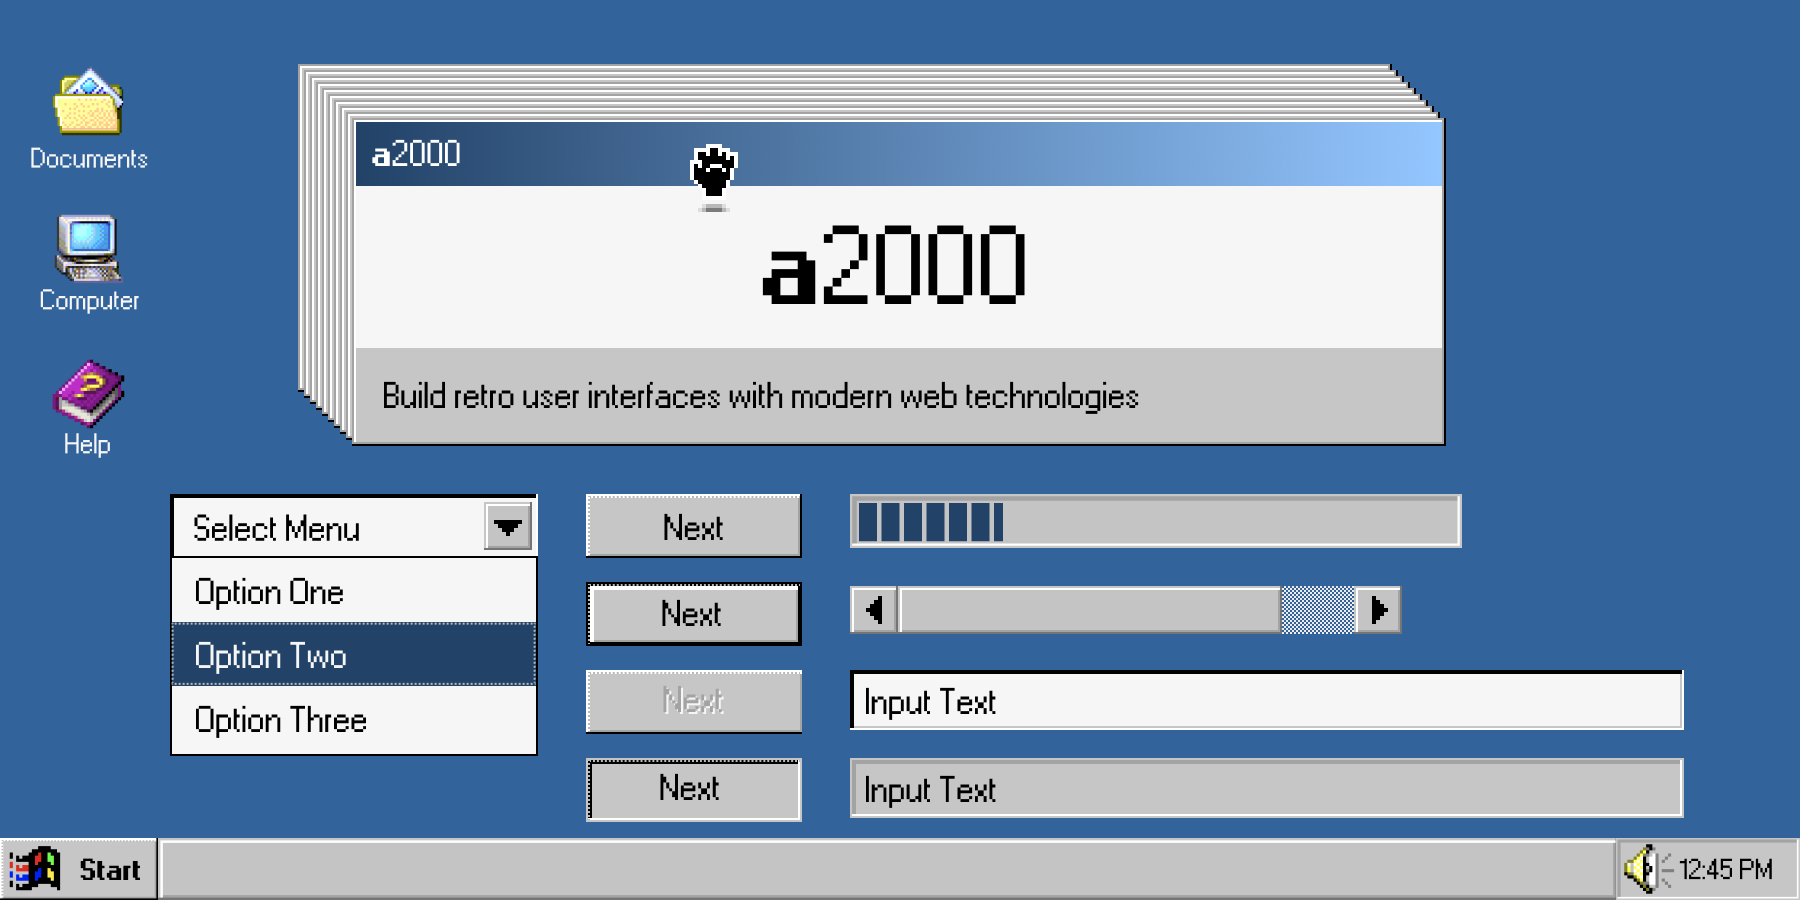 Andricos2000. Build retro user interfaces with modern web technologies